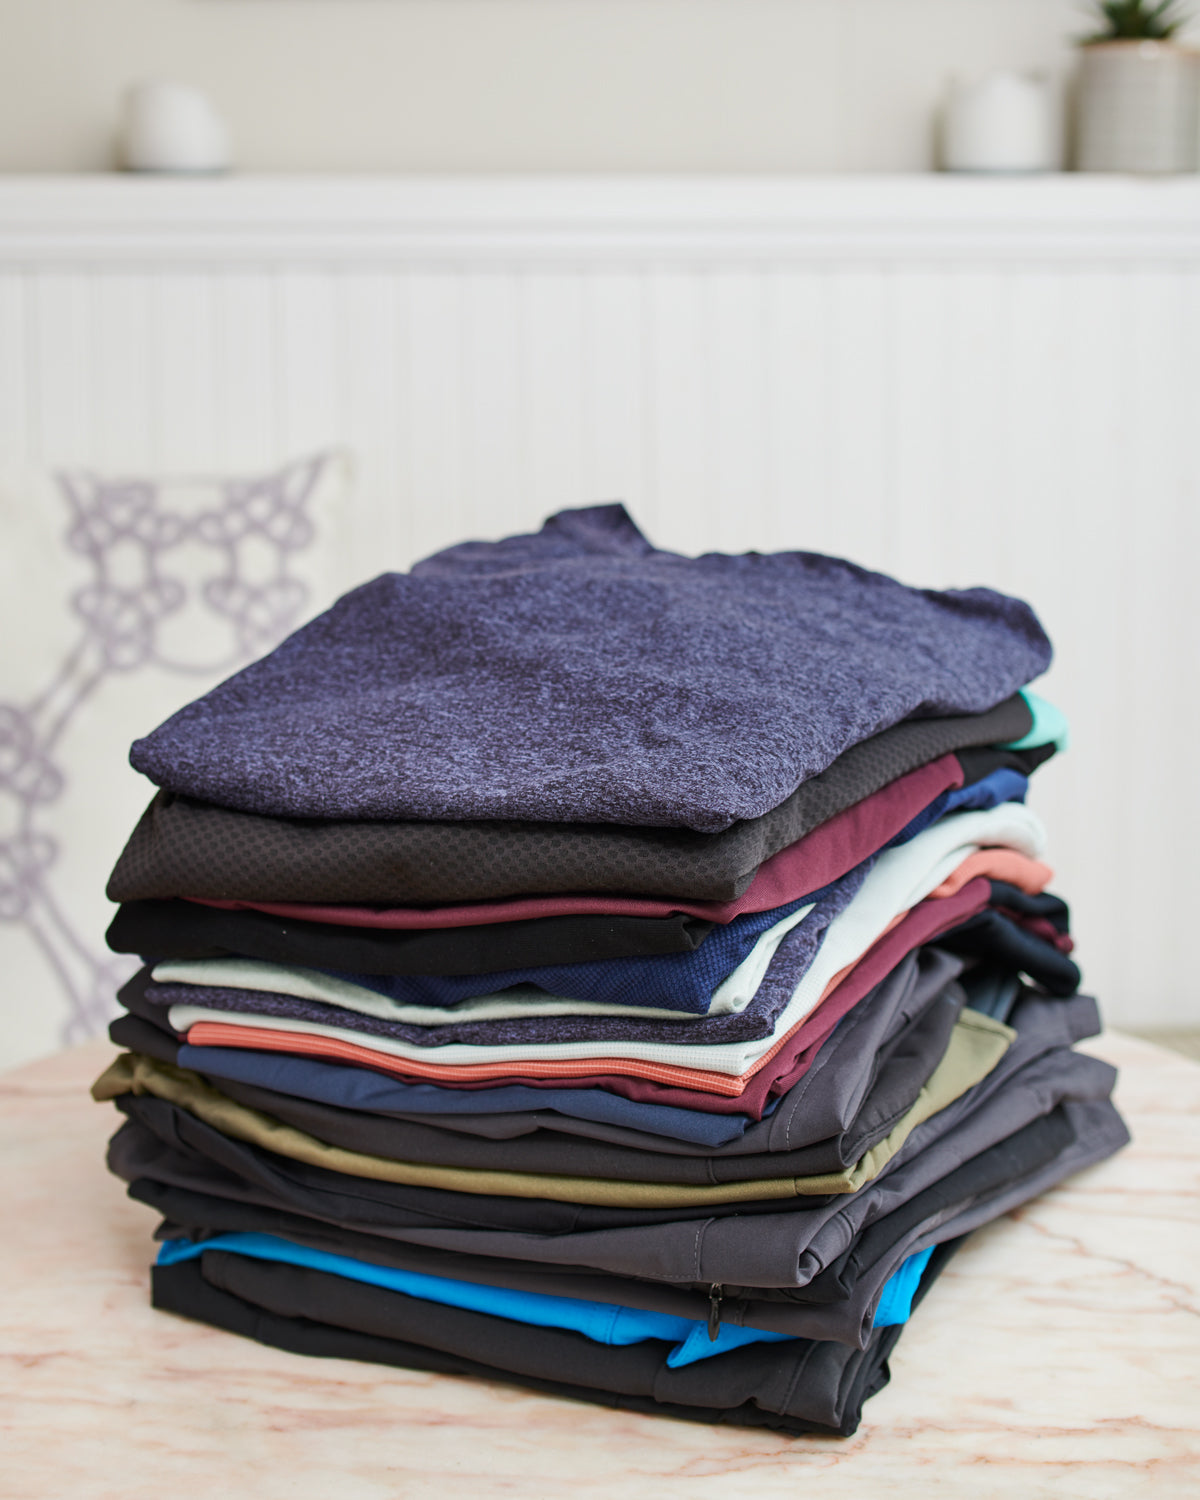 Tips For Washing Smelly Athletic Clothes - Kaden Apparel